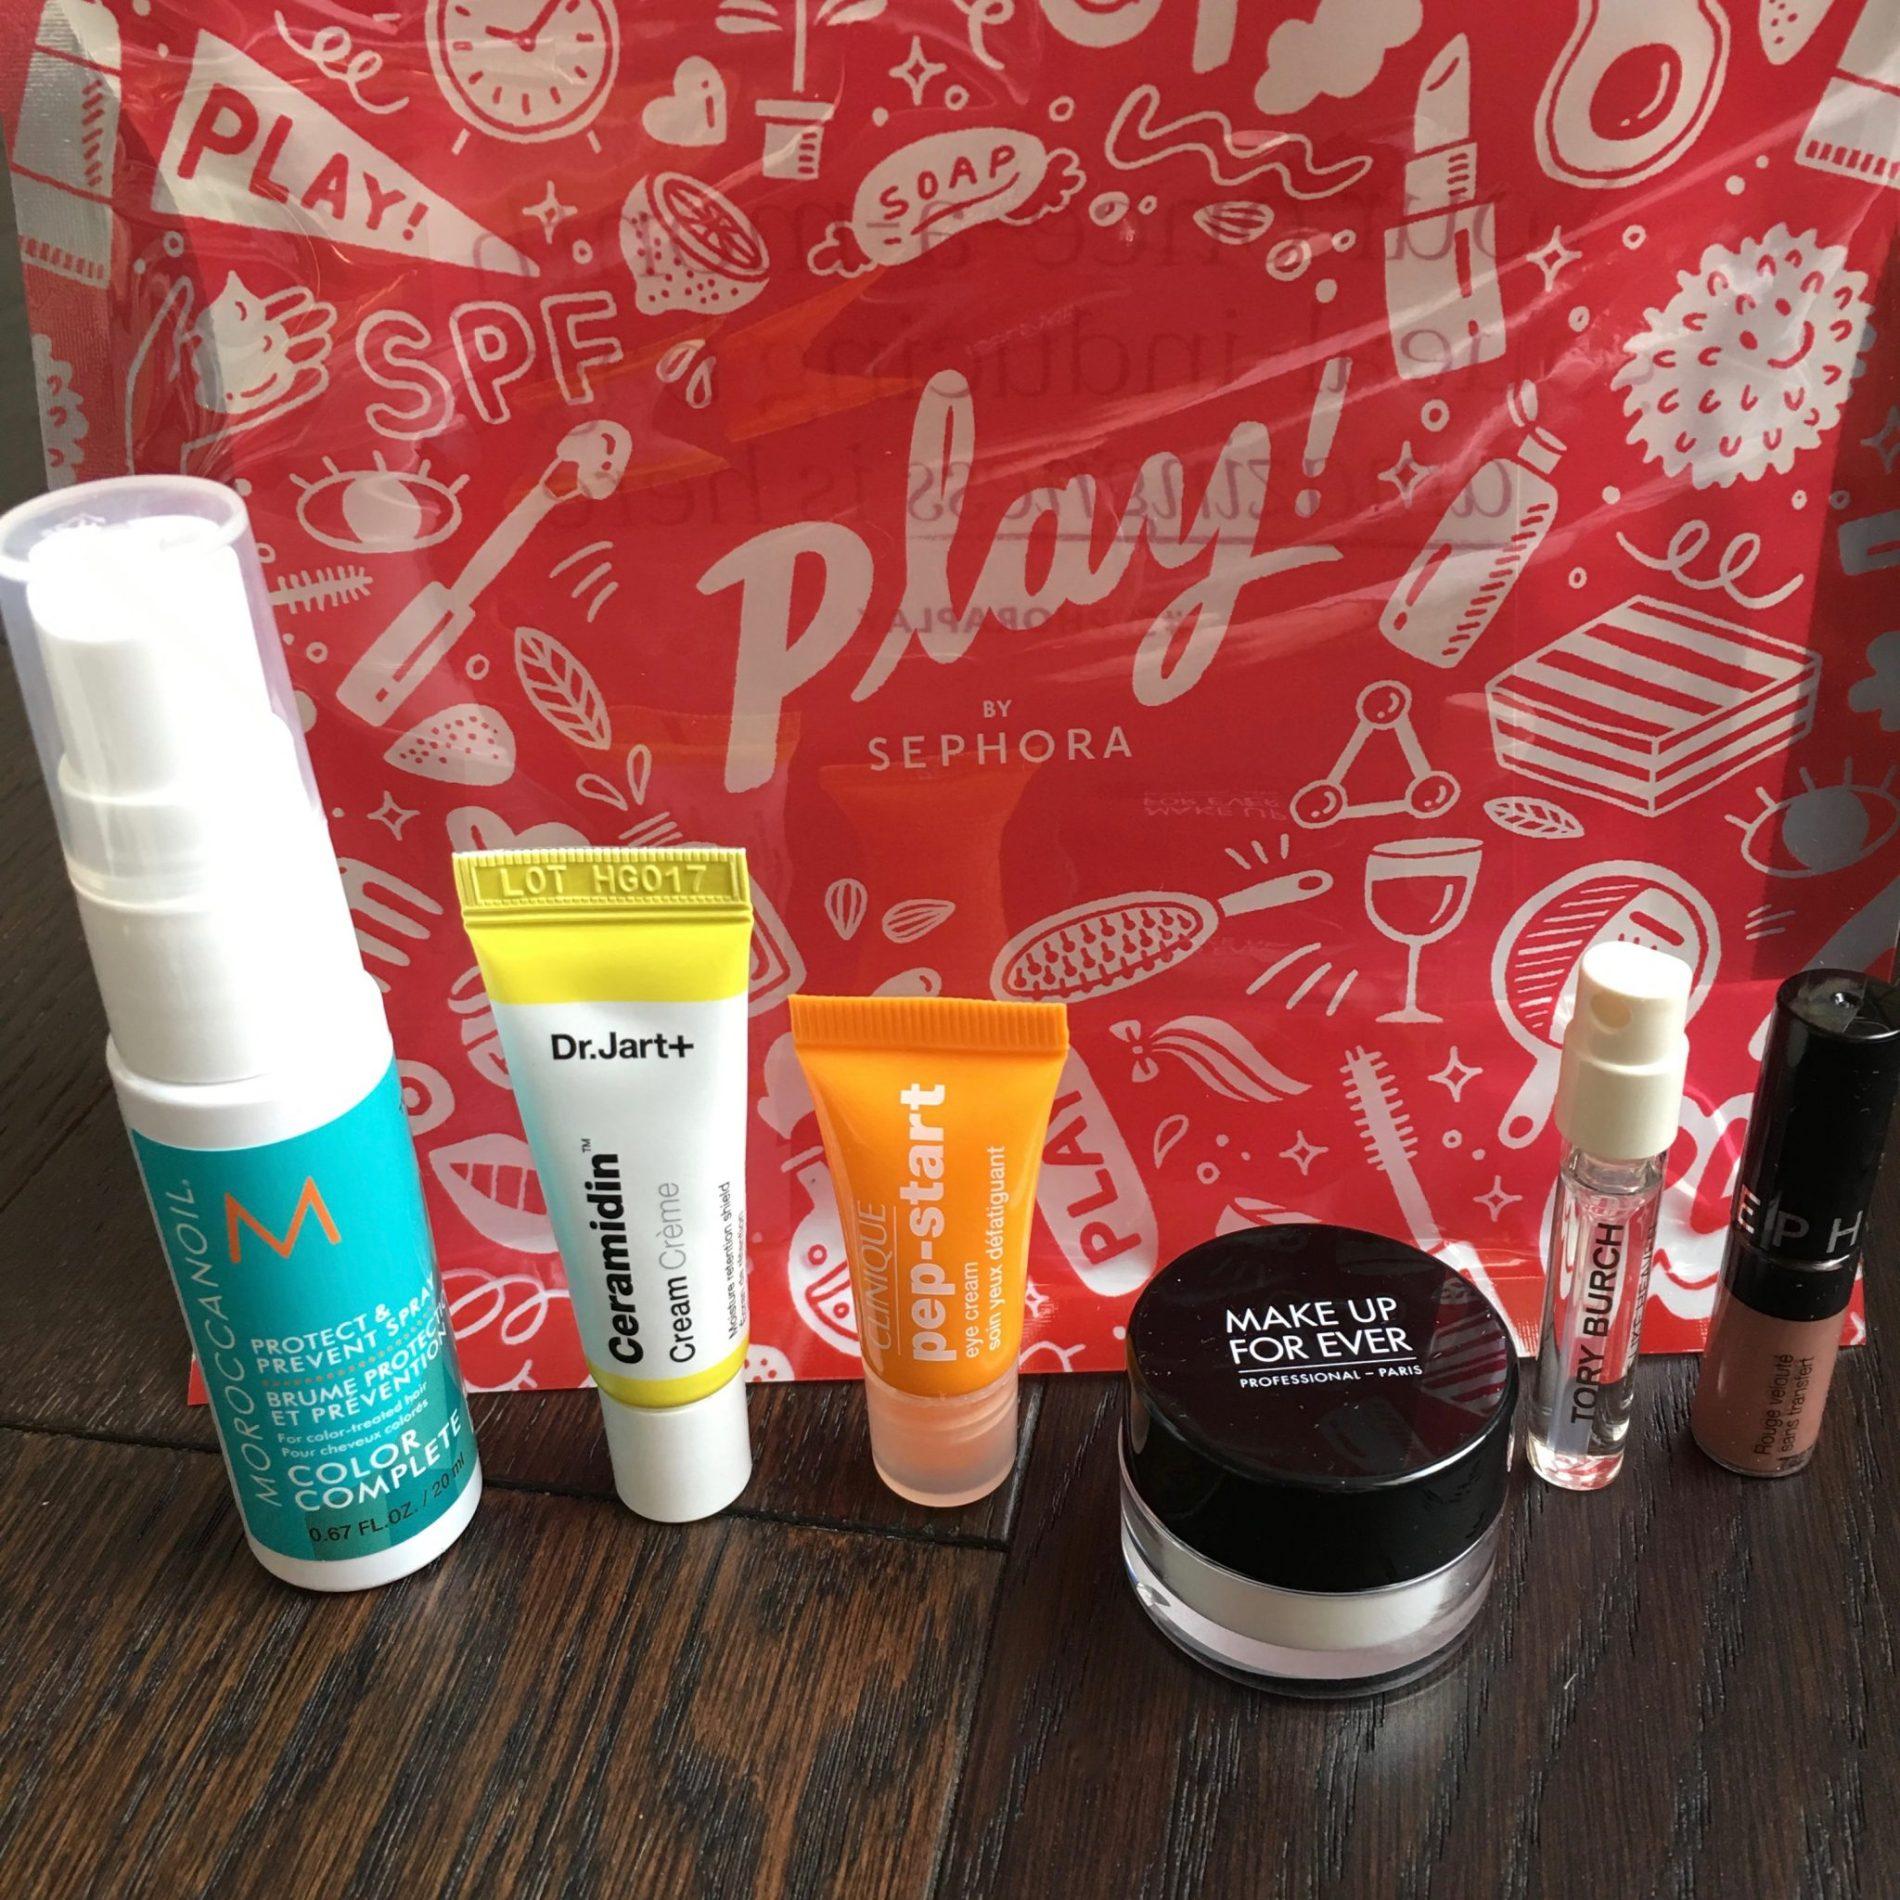 Read more about the article Play! by Sephora Review – November 2018